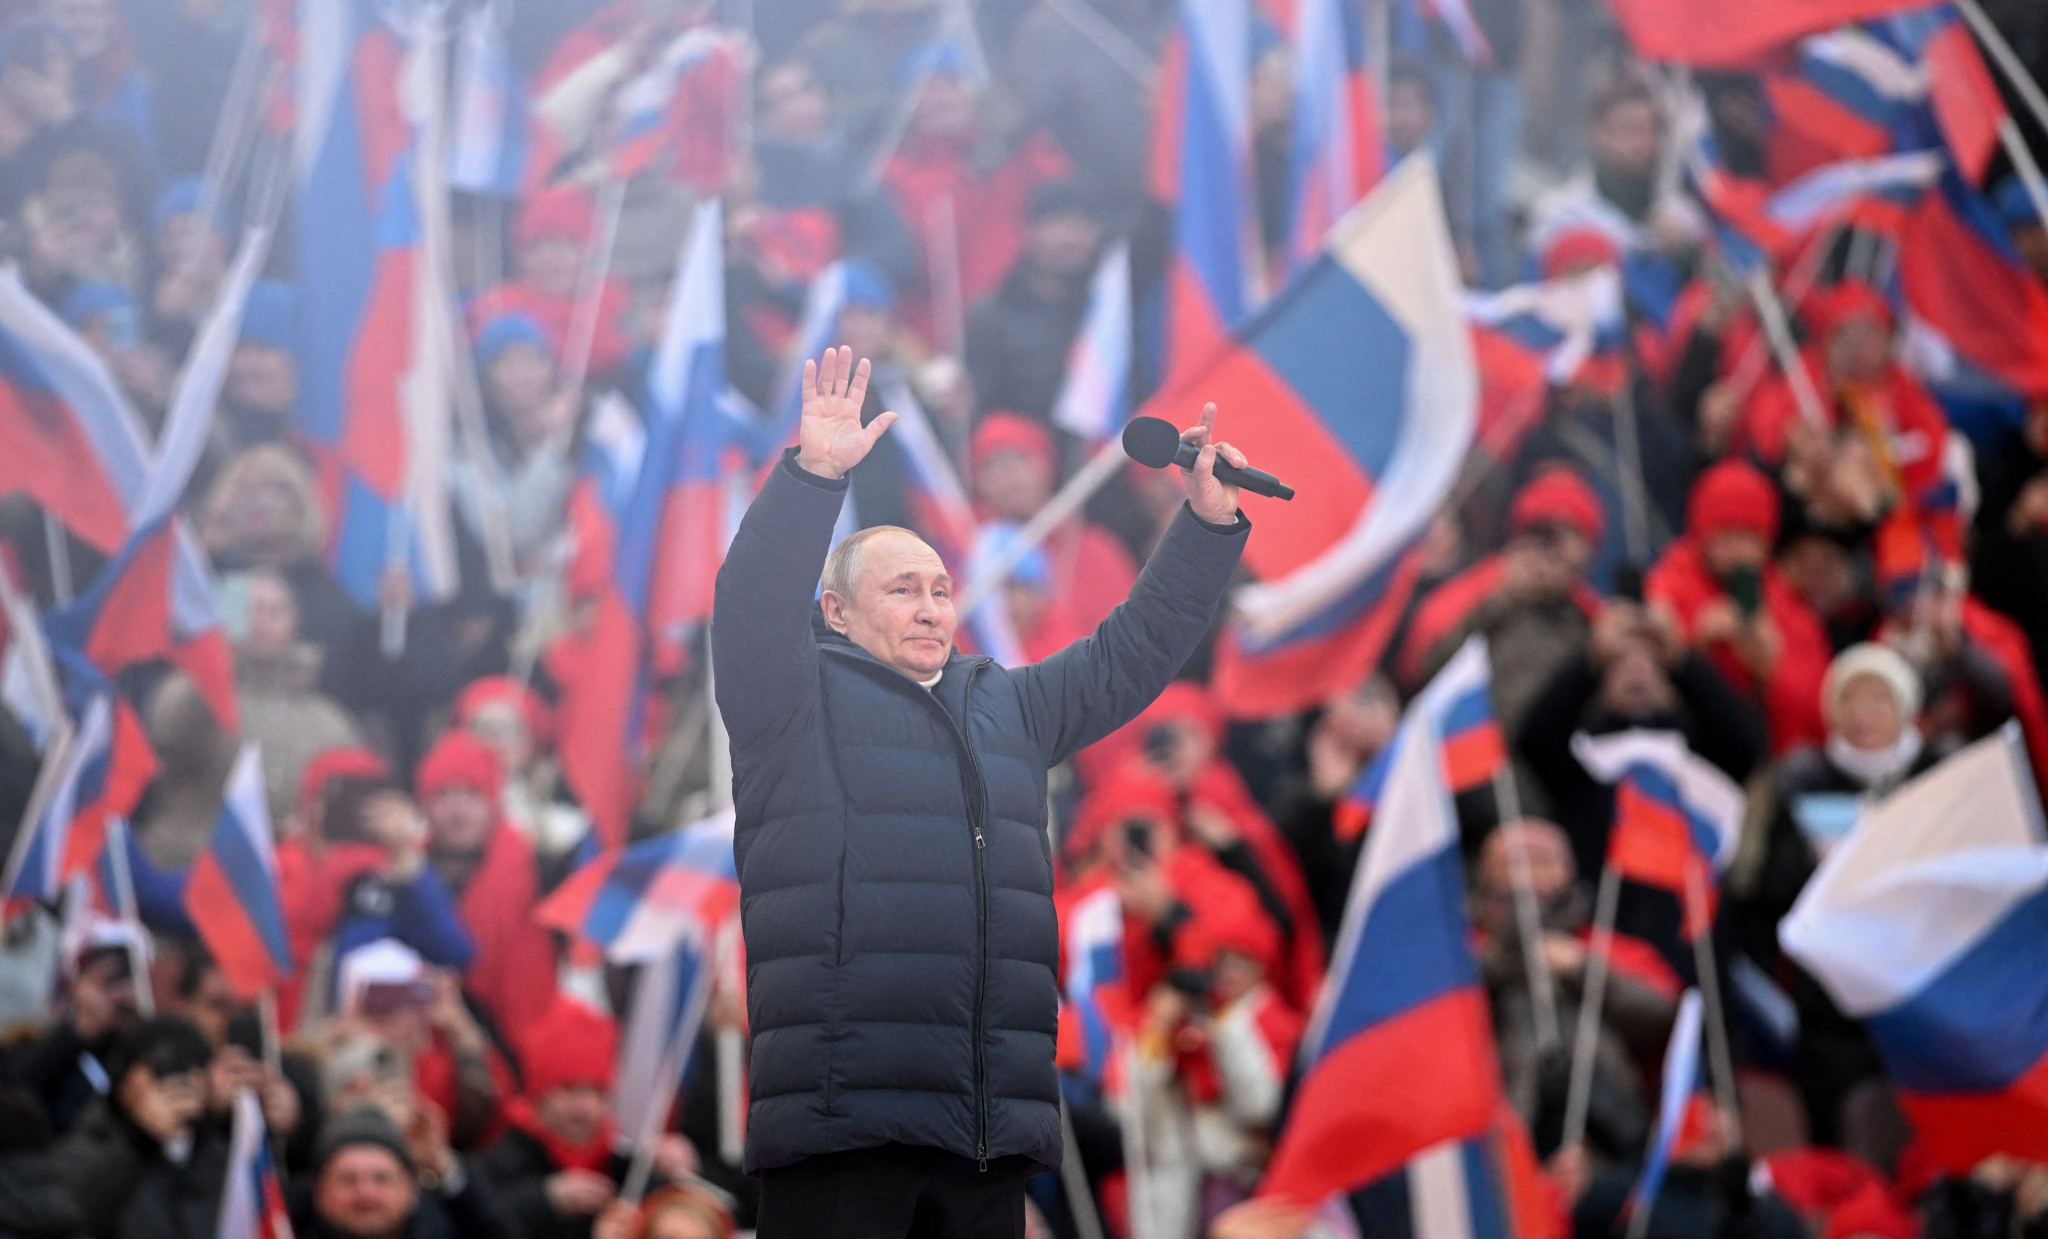 Vladimir Putin led the Moscow rally, which Evgeny Rylov attended ©Getty Images